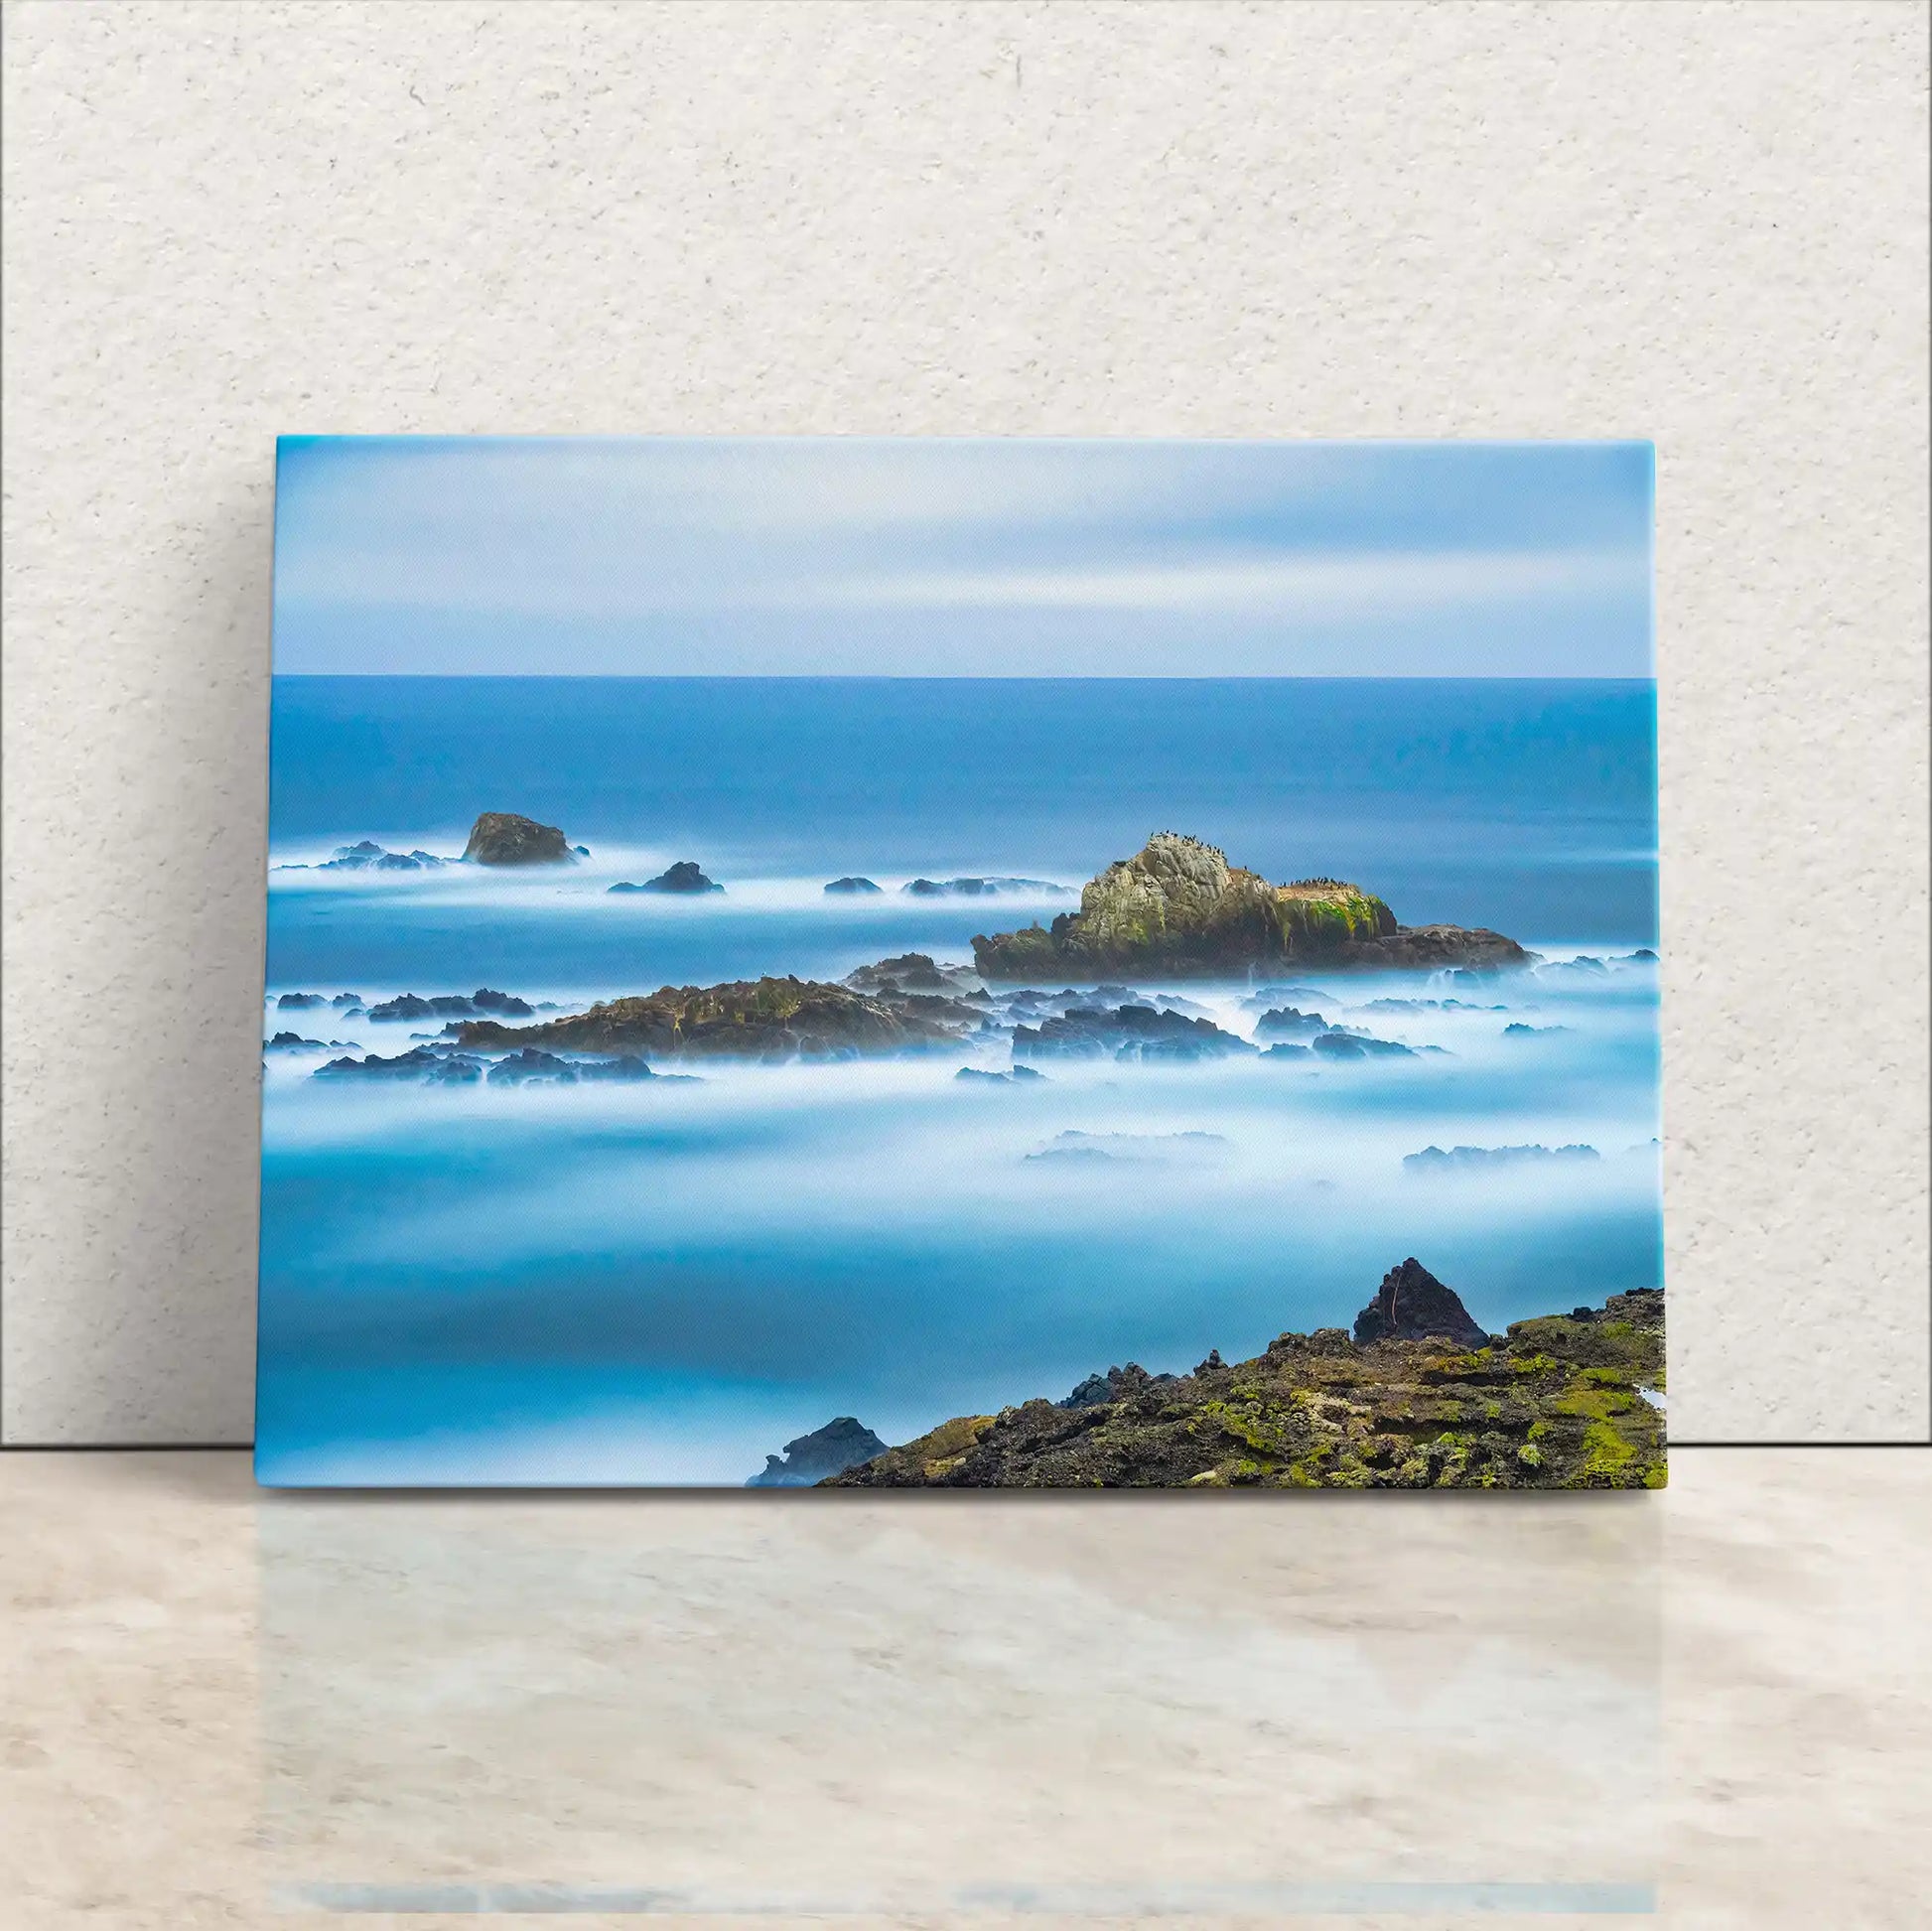 Canvas print of Point Lobos seascape propped against a wall, showcasing misty ocean waves amidst rocky shores.